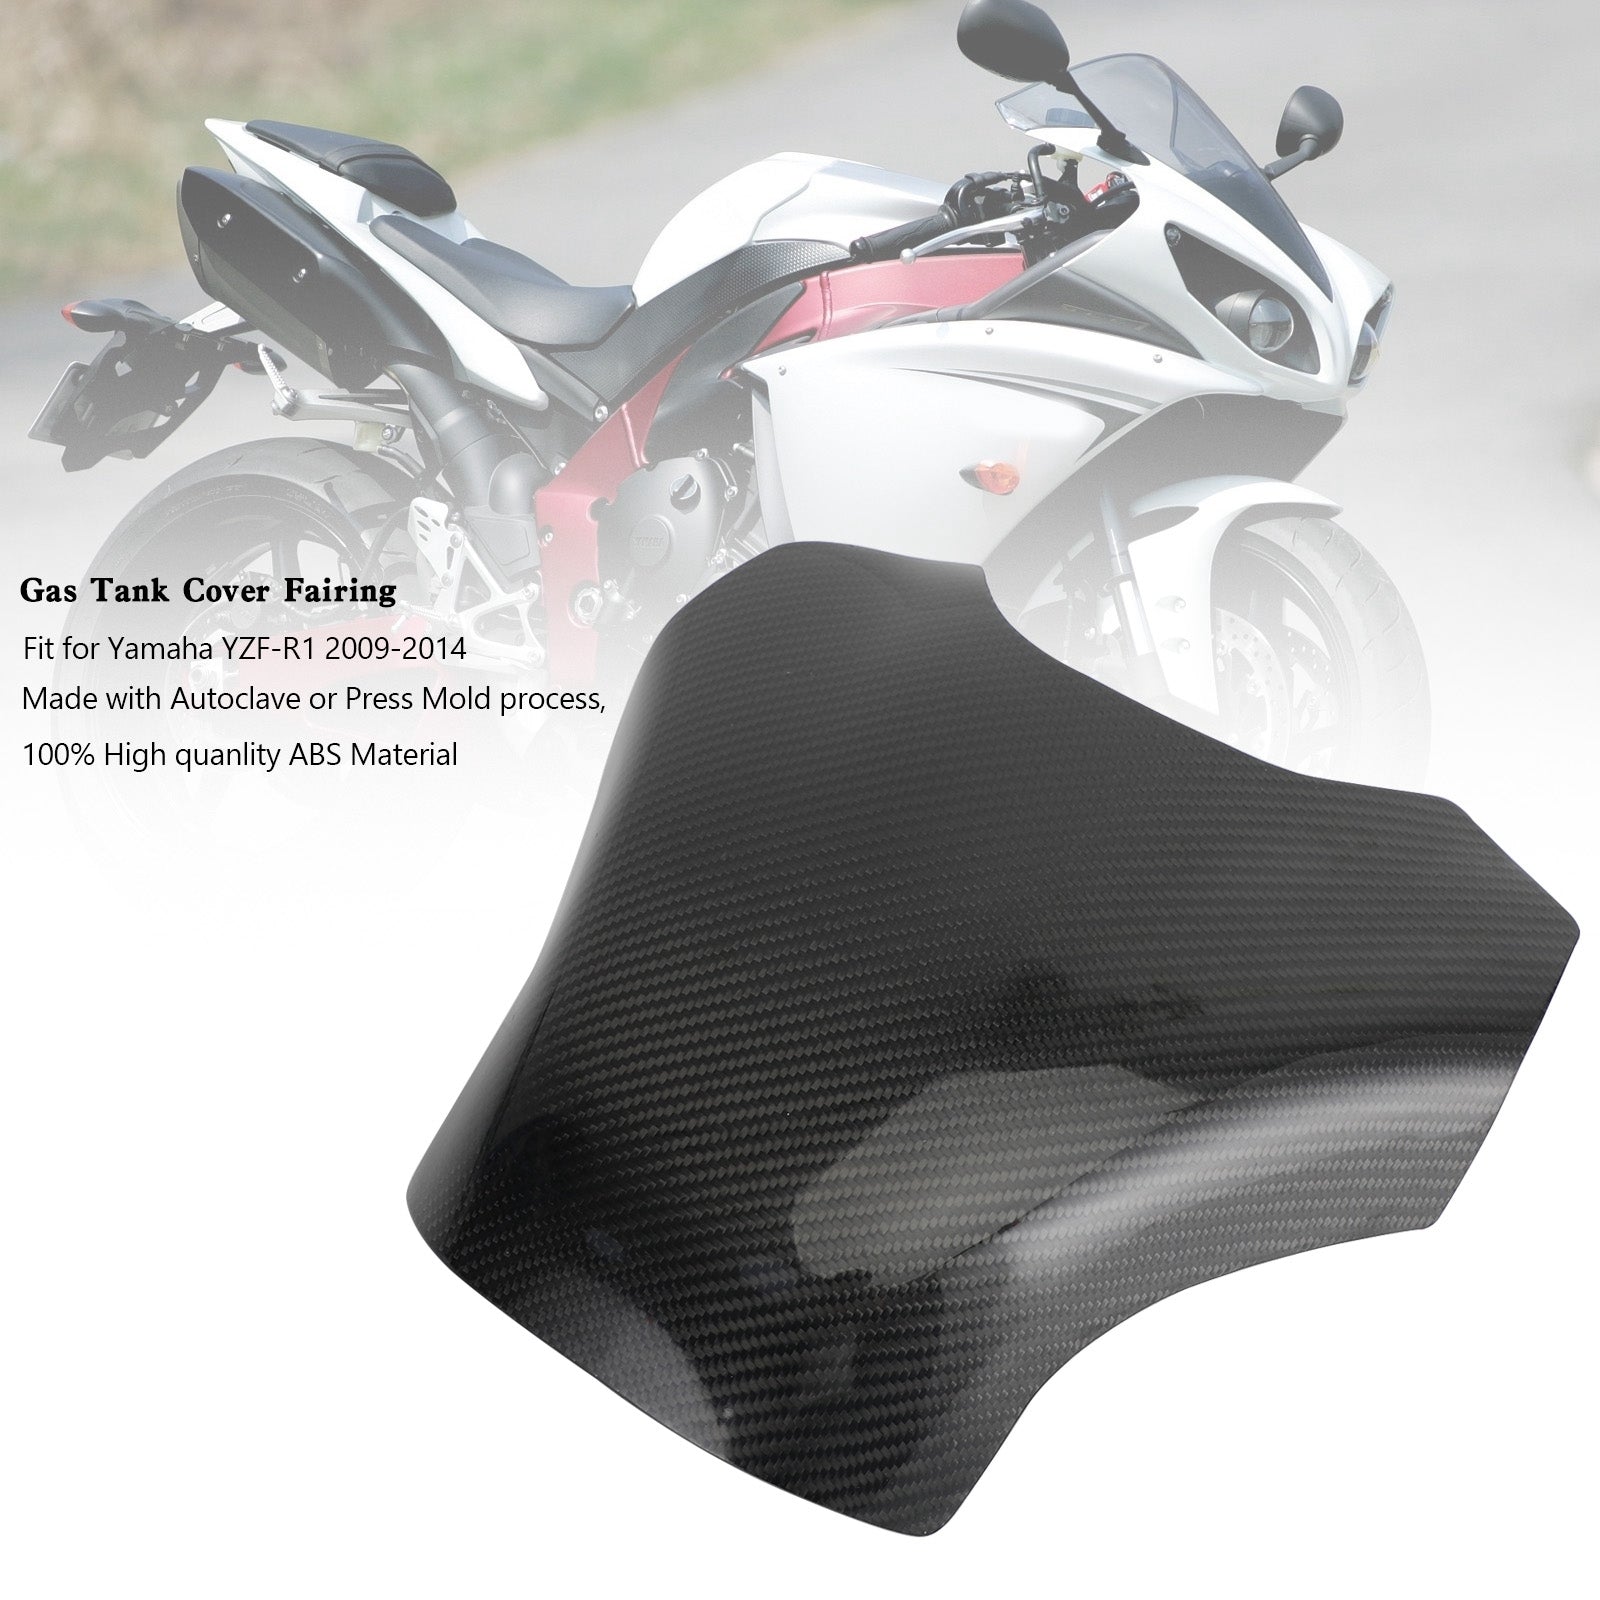 Gas Tank Cover Panel Fairing Protector For Yamaha YZF-R1 2009-2014 Carbon